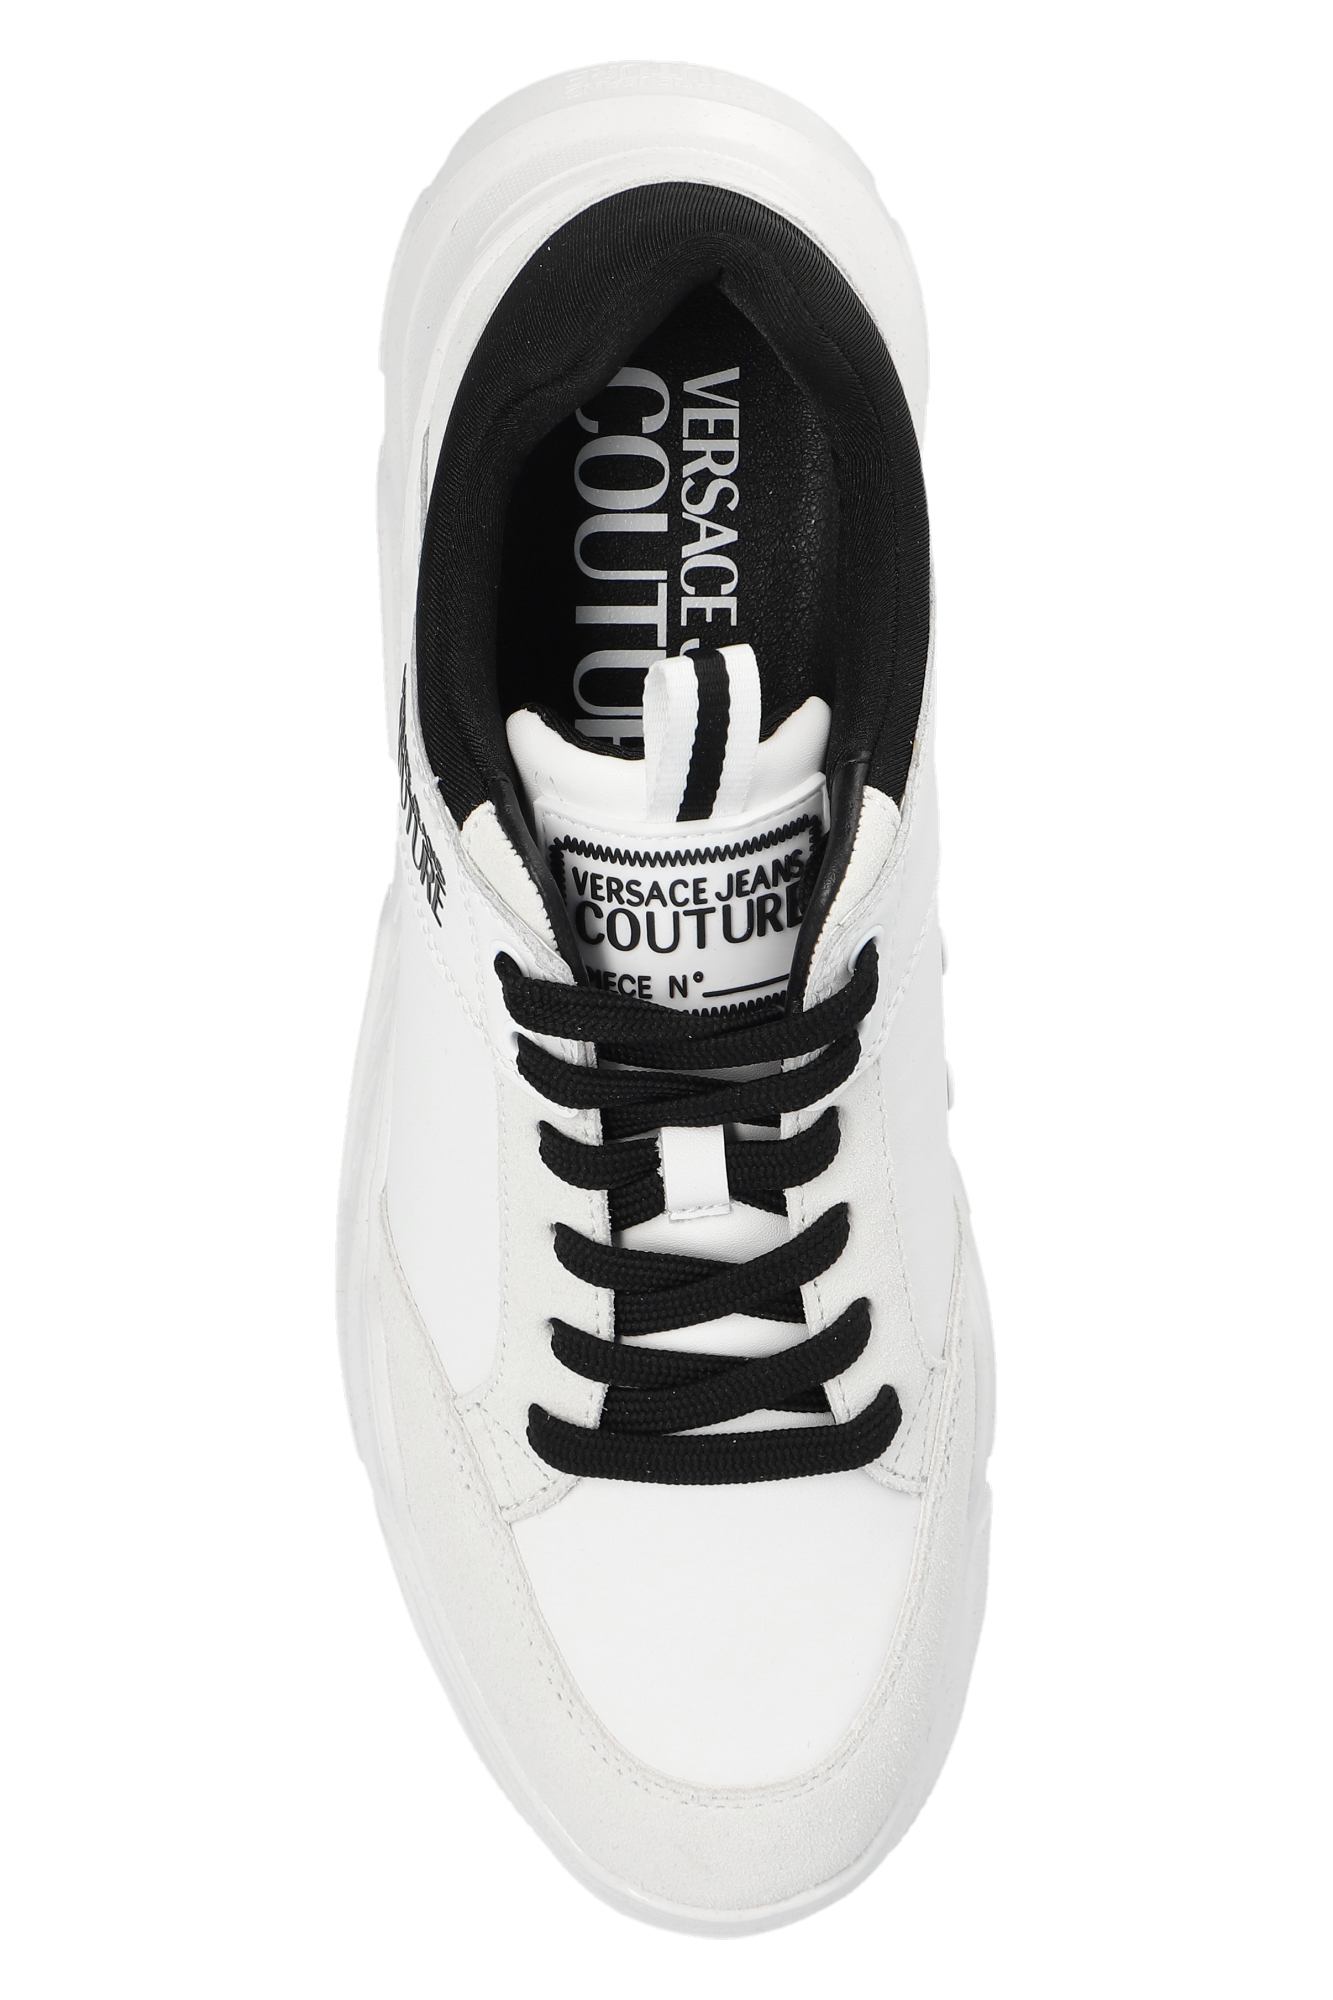 These juniors X football boots support fast feet and faster thinking Printed sneakers